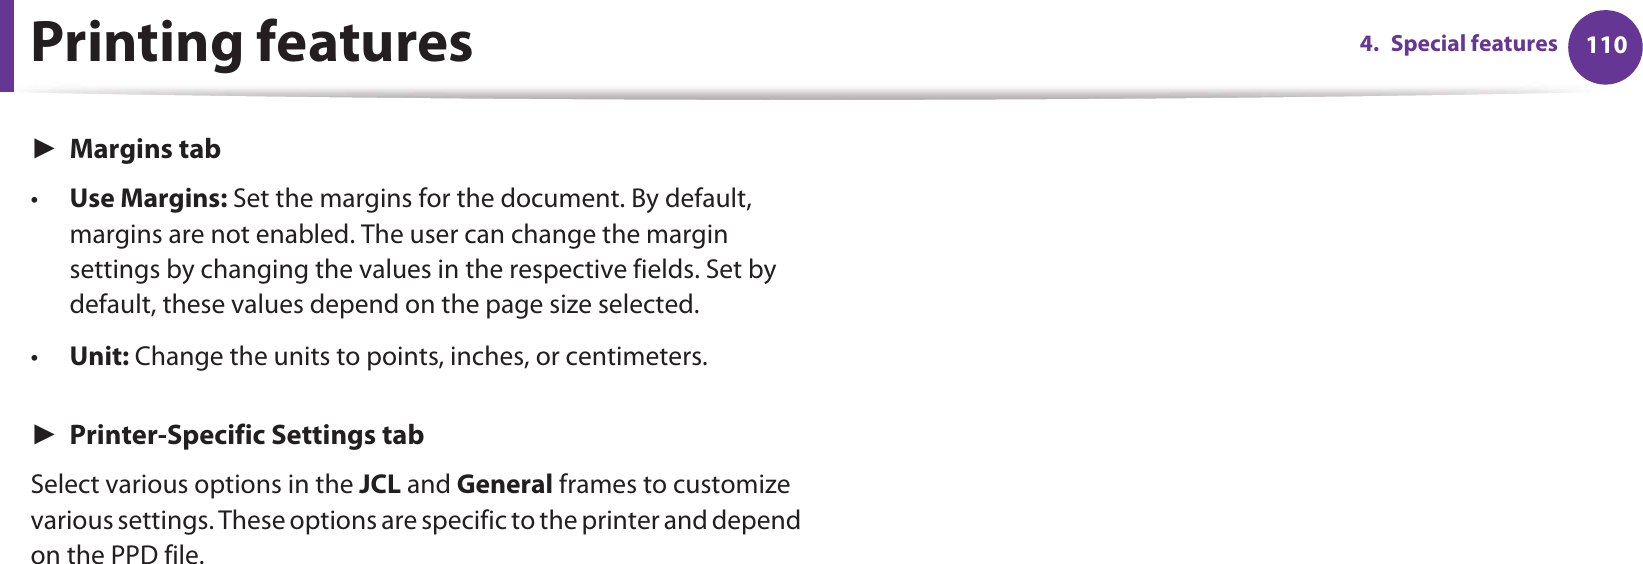 Printing features 1104. Special featuresŹMargins tab•Use Margins: Set the margins for the document. By default, margins are not enabled. The user can change the margin settings by changing the values in the respective fields. Set by default, these values depend on the page size selected.•Unit: Change the units to points, inches, or centimeters.ŹPrinter-Specific Settings tabSelect various options in the JCL and General frames to customize various settings. These options are specific to the printer and depend on the PPD file.